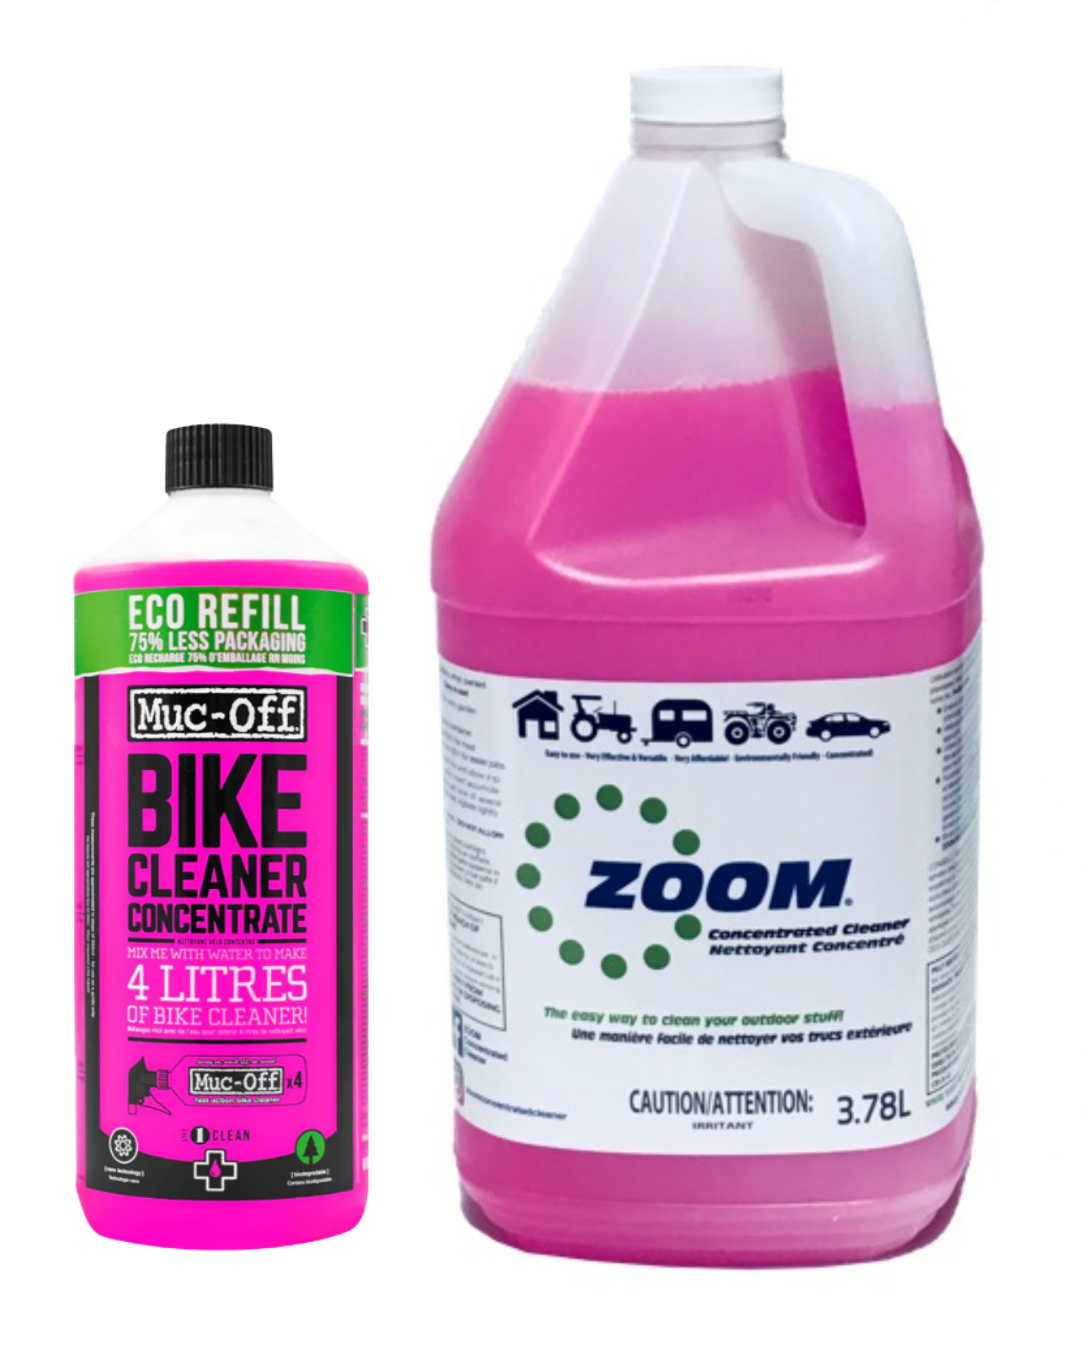 ZOOM Cleaner 3.78L concentrate vs. Muc-off 1L Concentrate